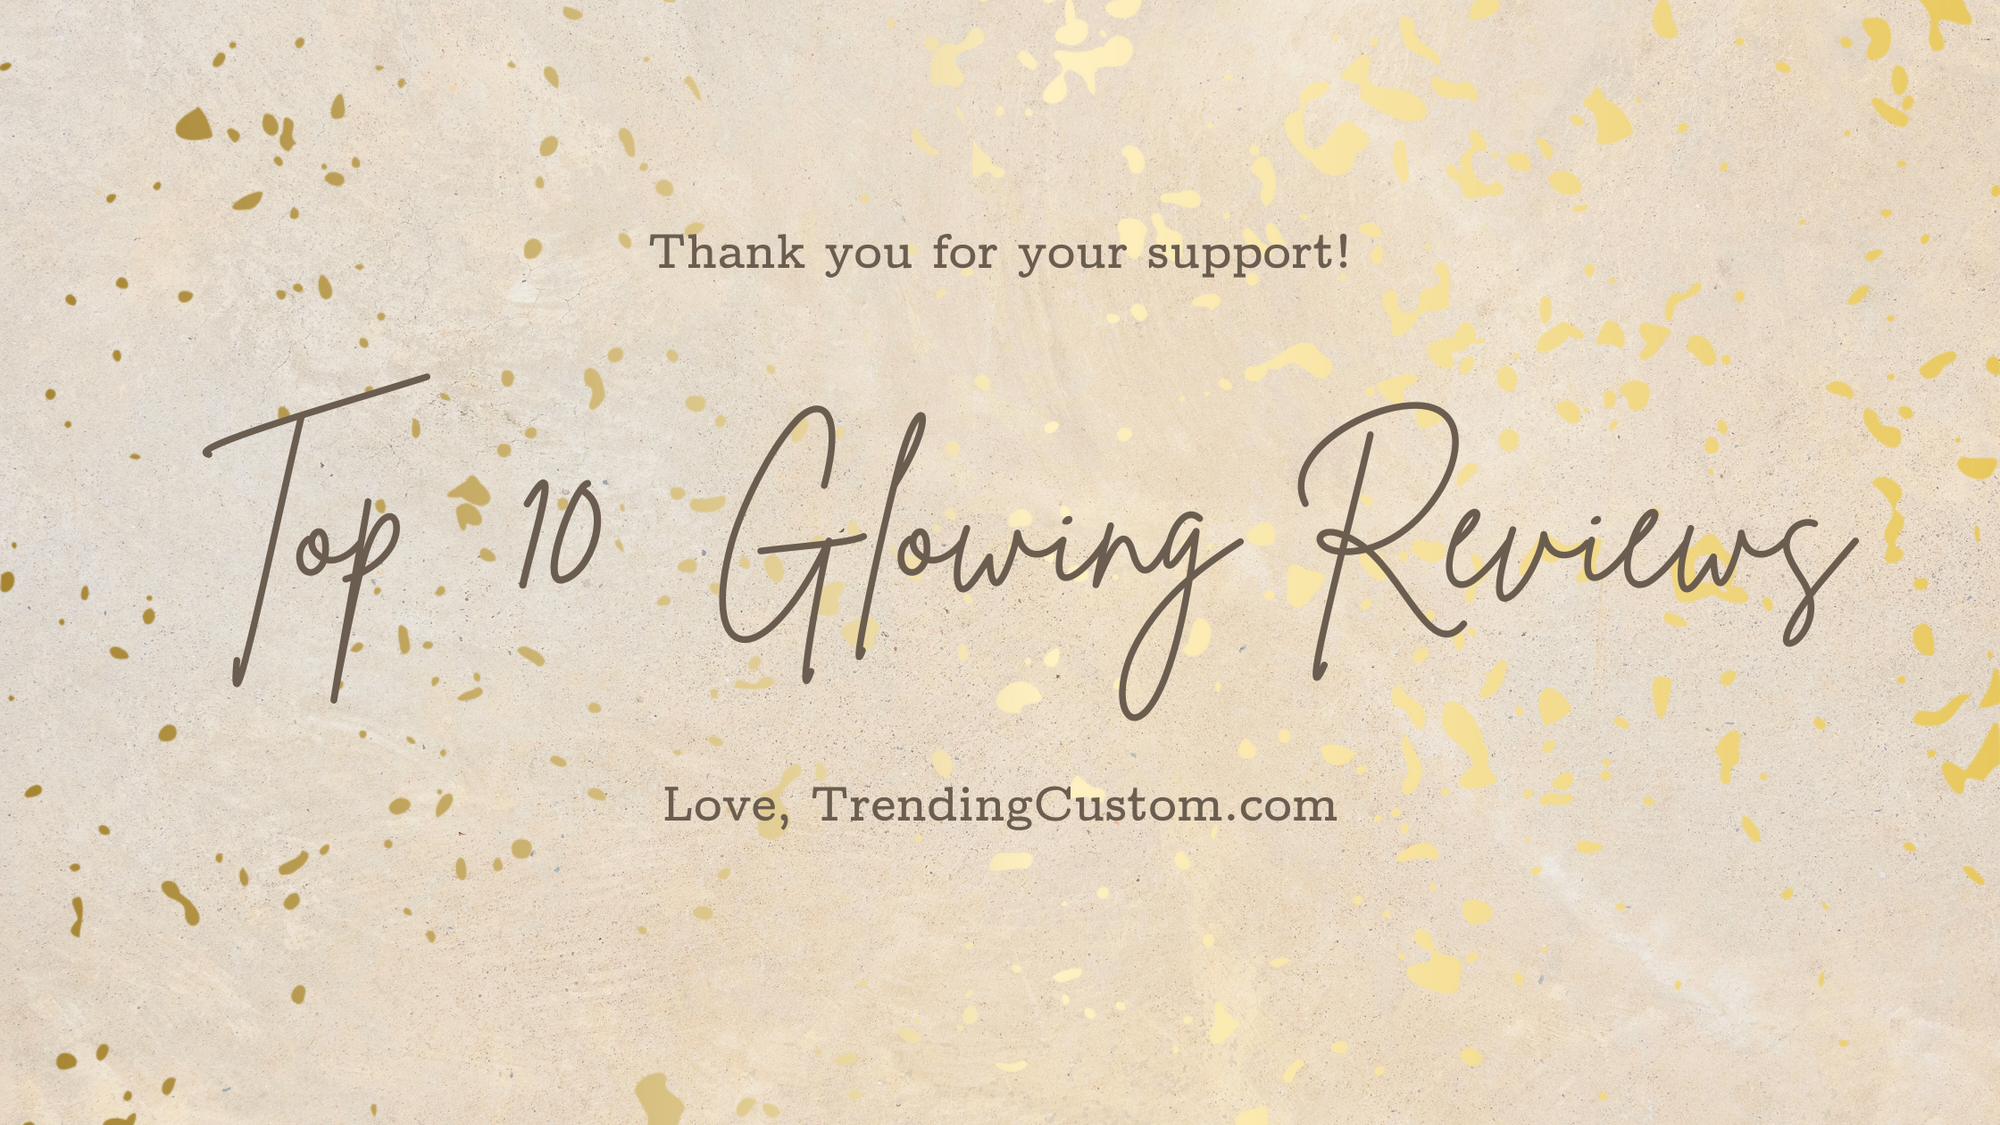 Top 10 Glowing Reviews: Our Customers Have Spoken! - April 15th